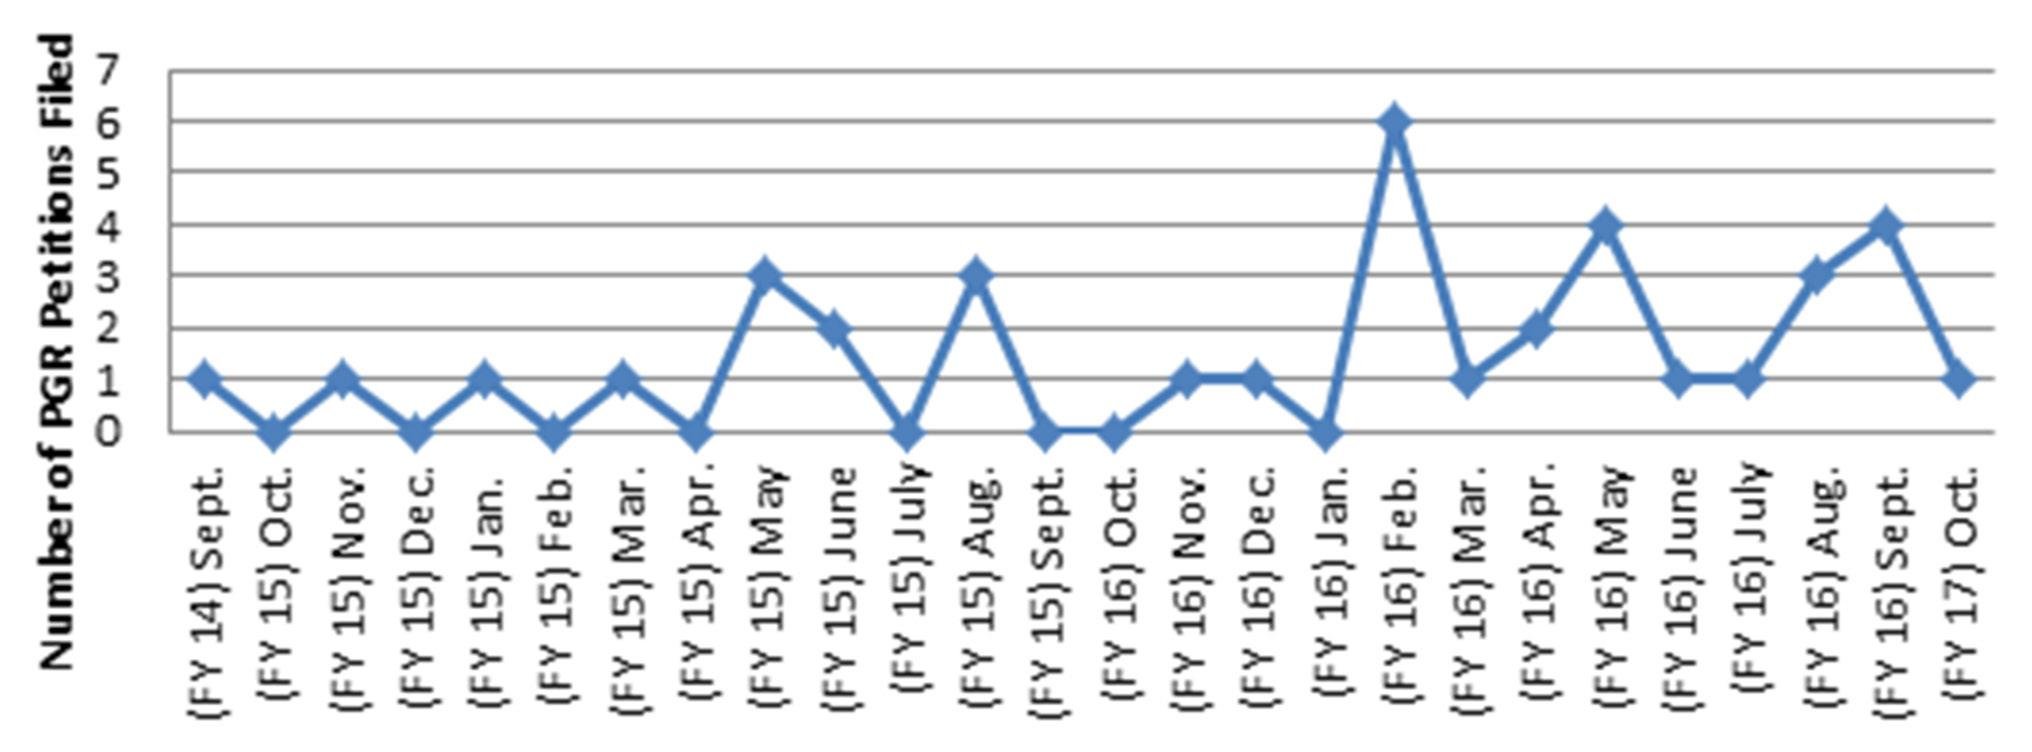 Figure 1: Number of PGR Petitions Filed by Month